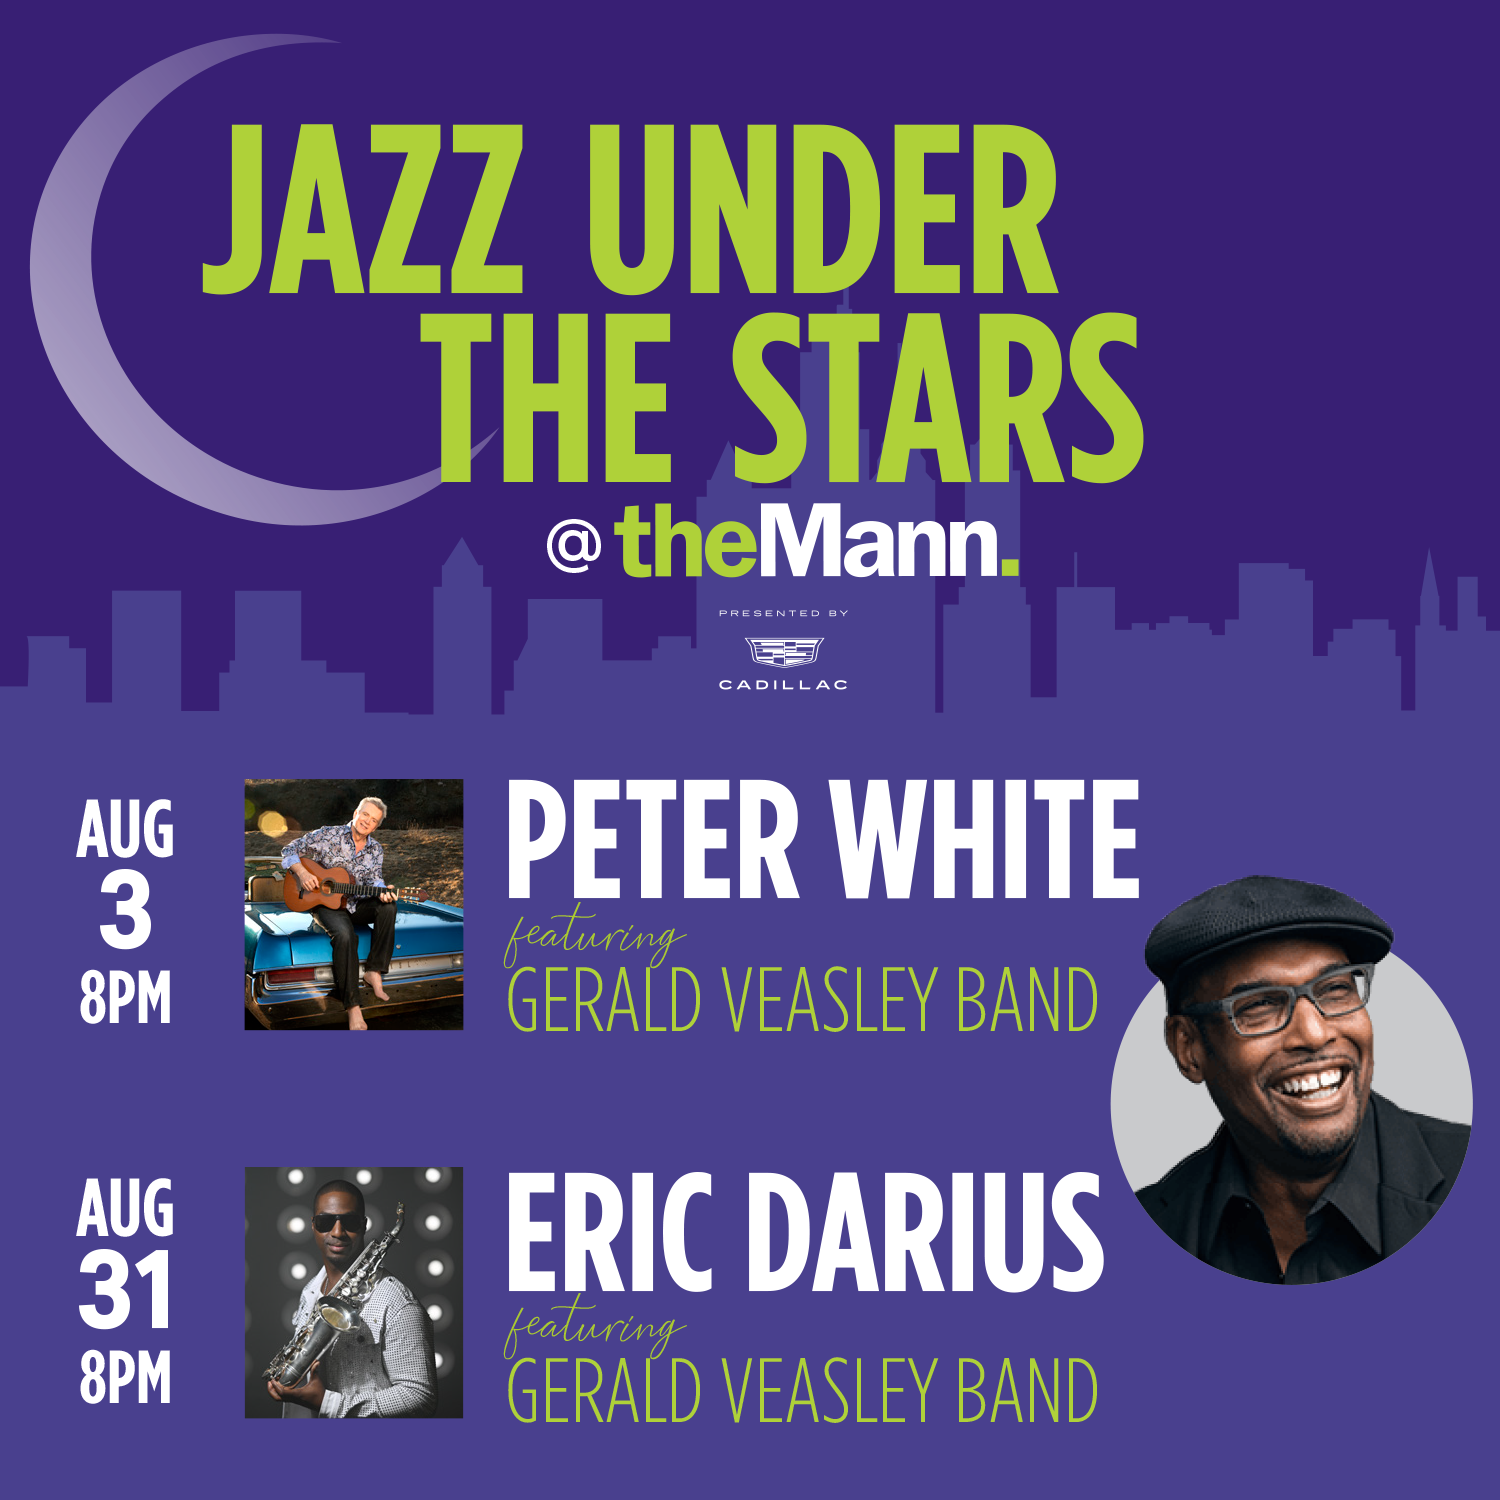 Jazz Under the Stars Presented by Cadillac